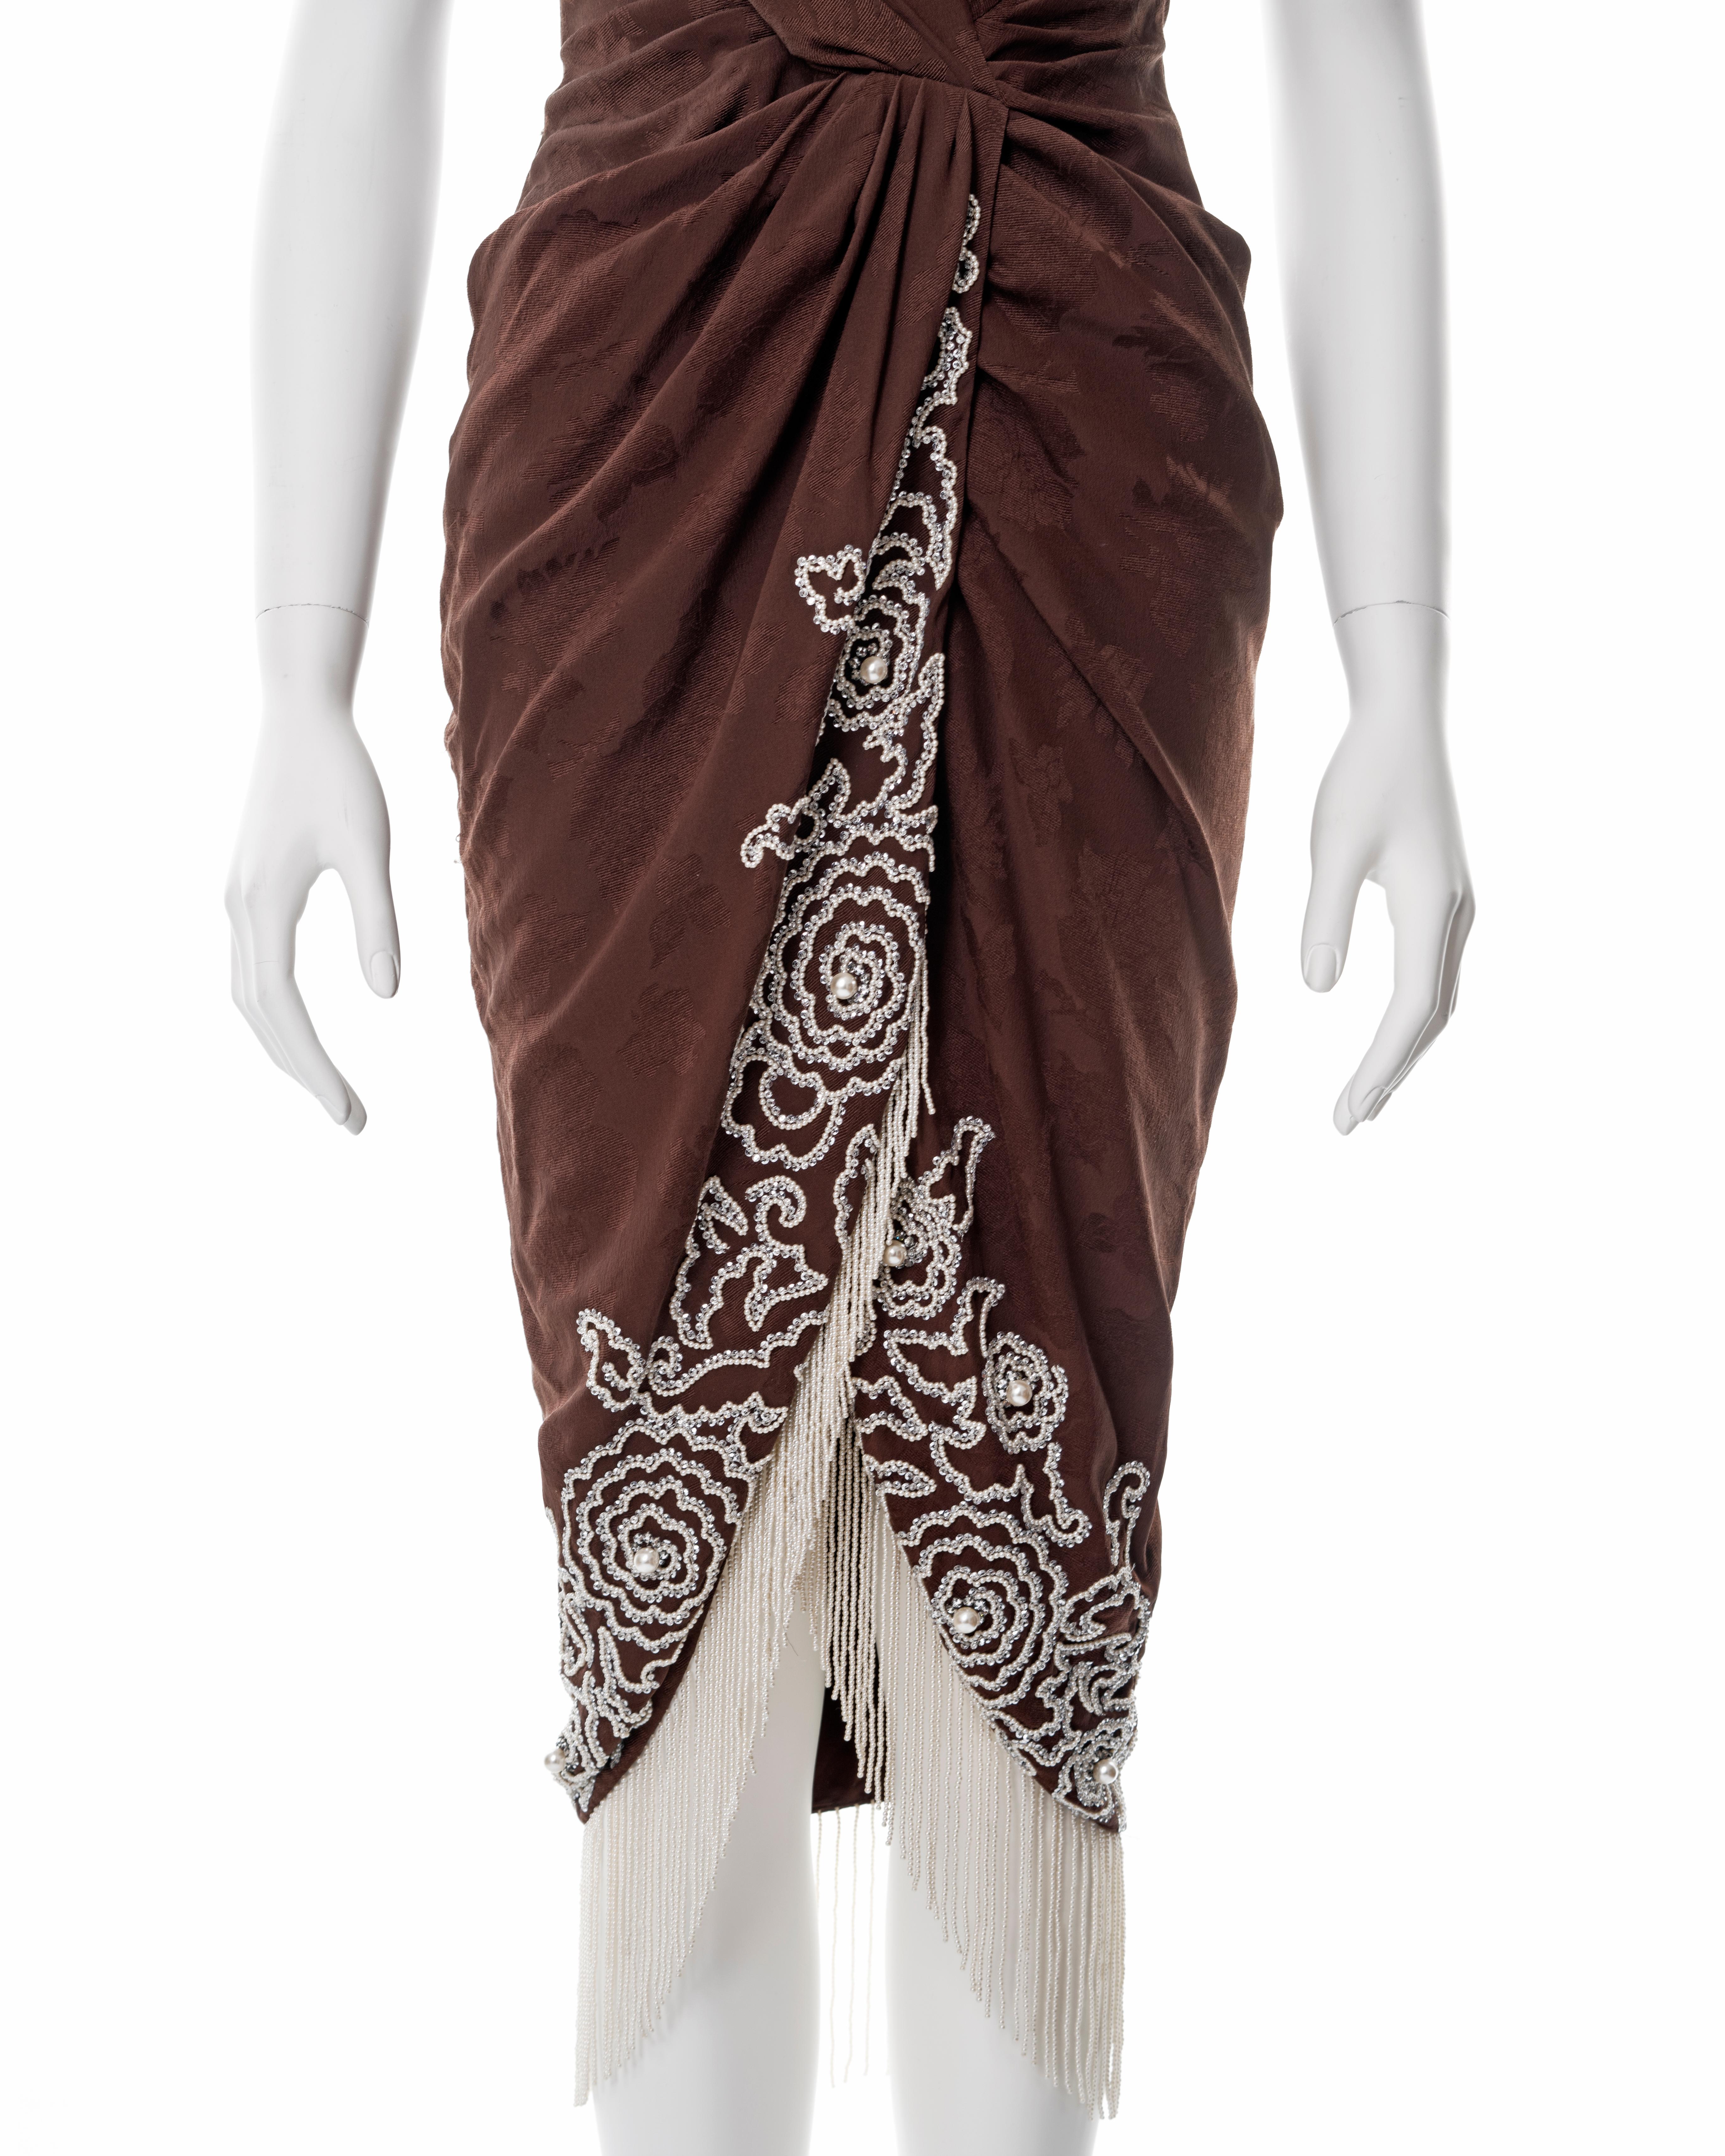 Women's Christian Dior by John Galliano pearl beaded brown silk cocktail dress, ss 2008 For Sale